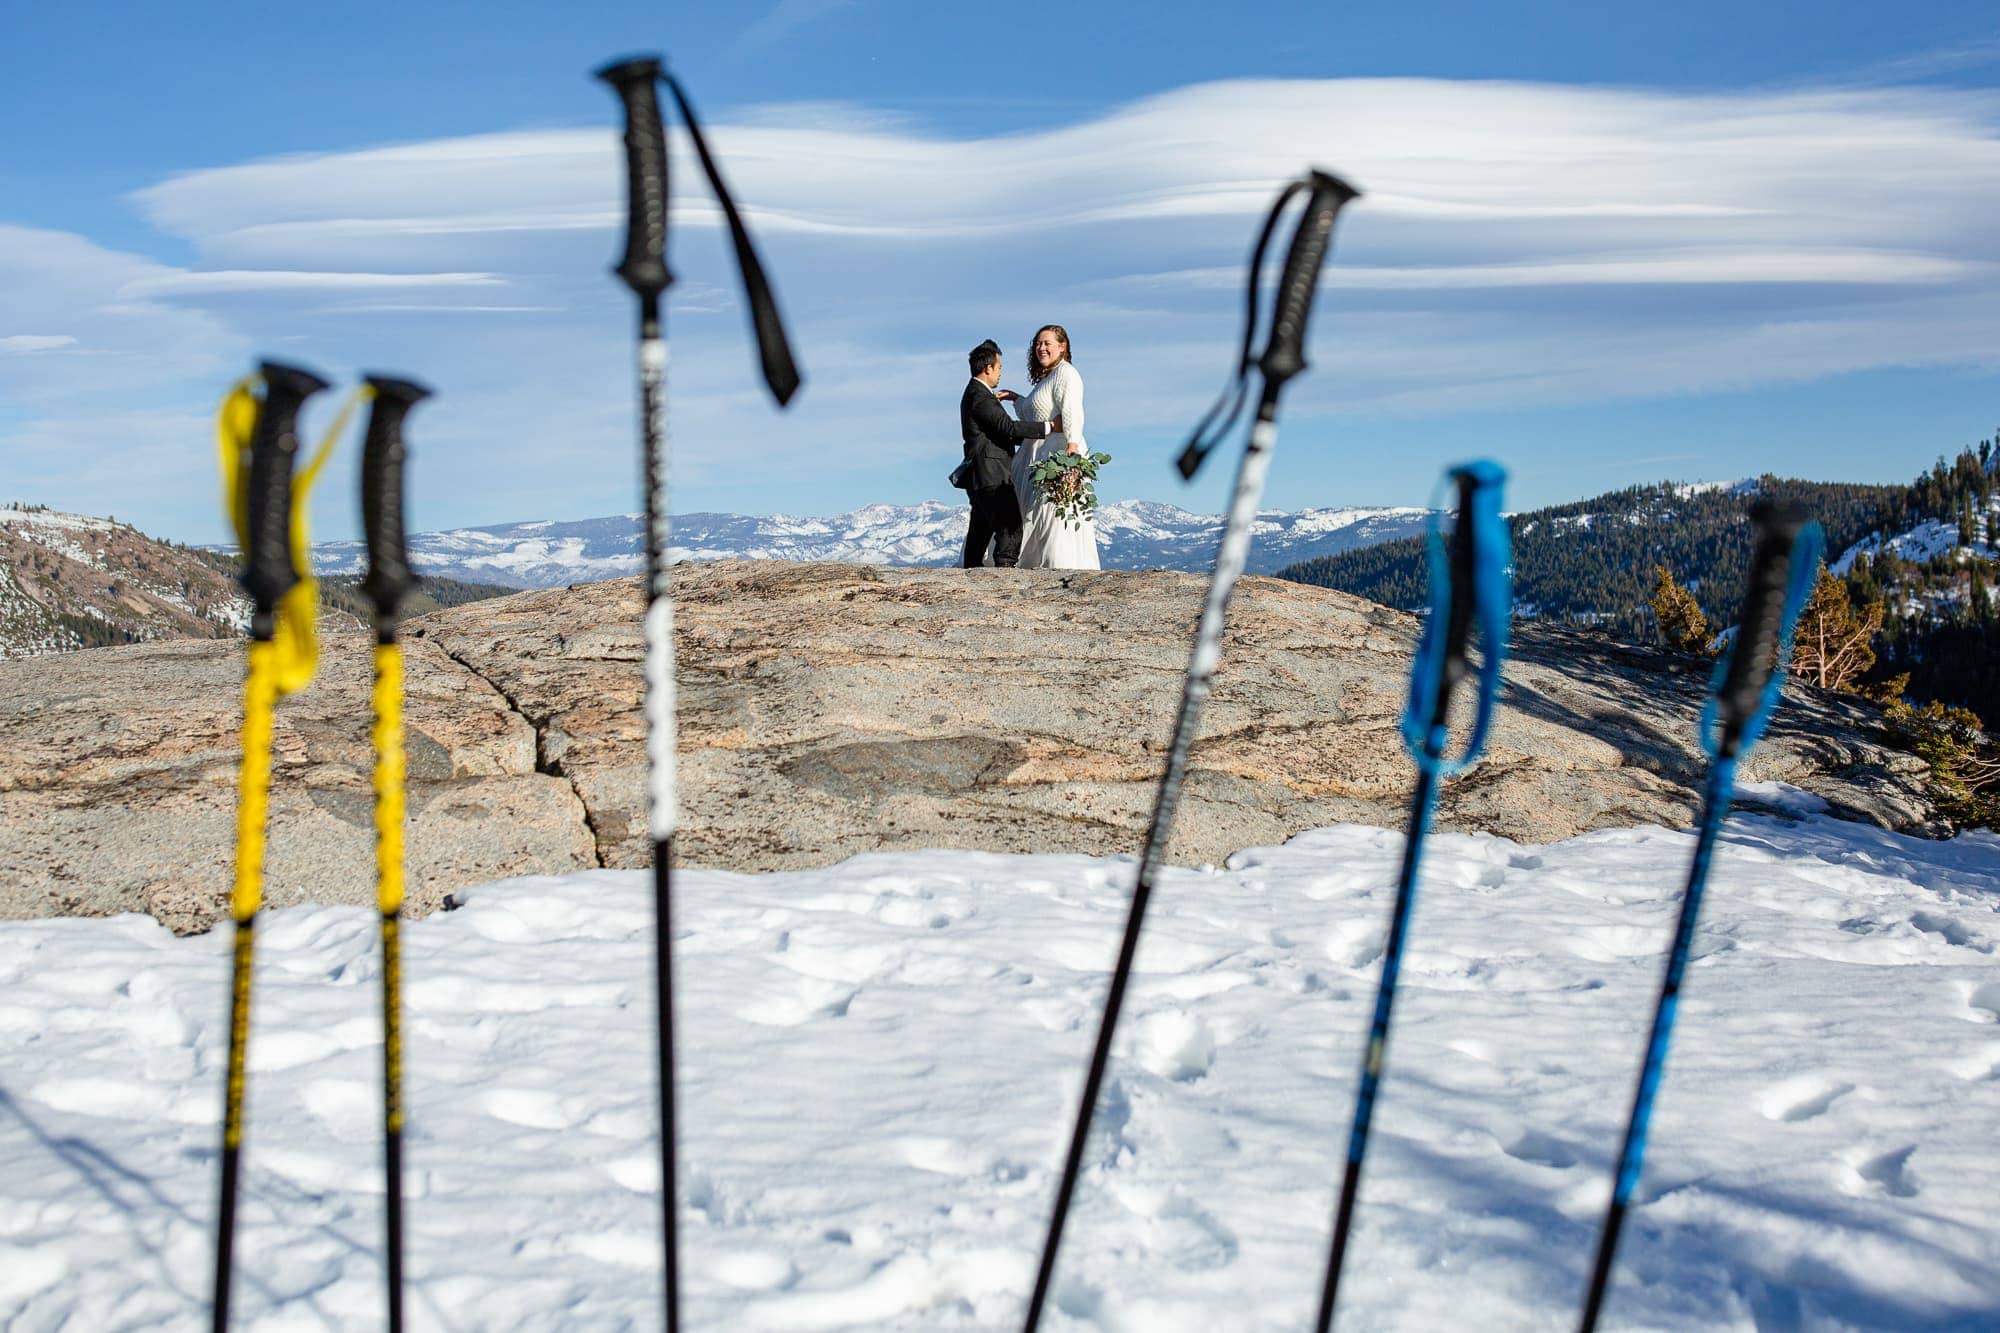 Elopement couple on top of a snowy mountain with snow shoeing poles in the foreground